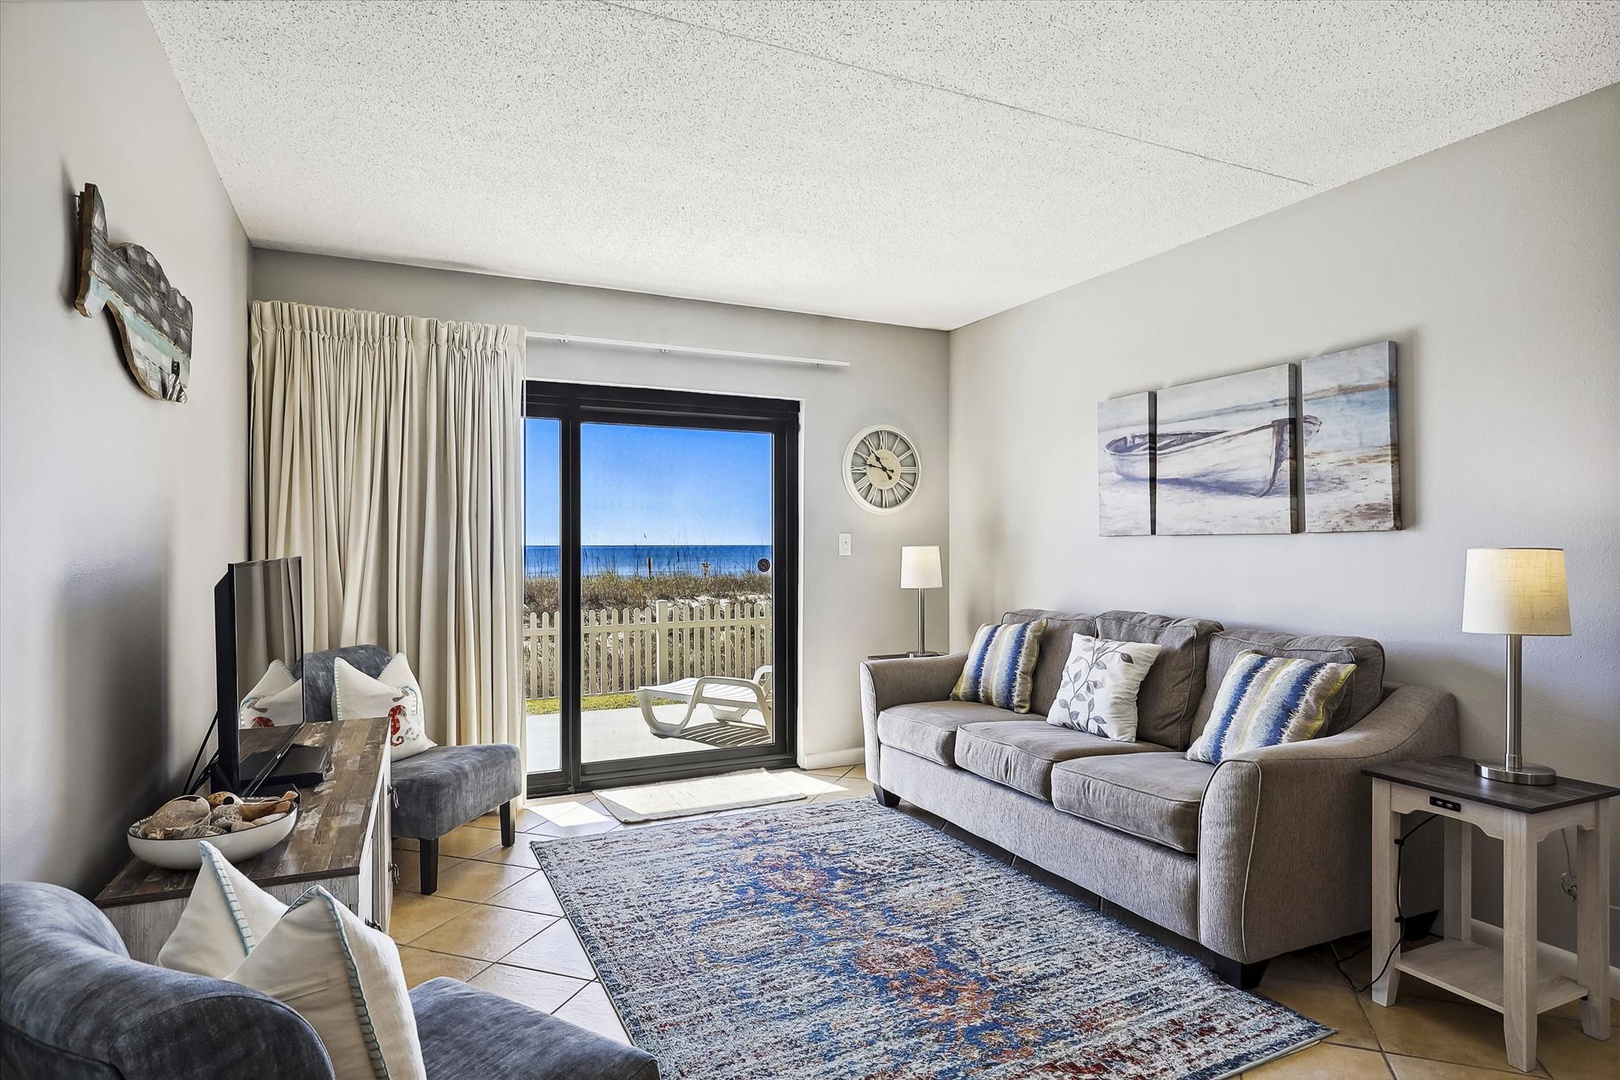 Ocean Breeze West Unit 104 Living Room and Beach View Patio